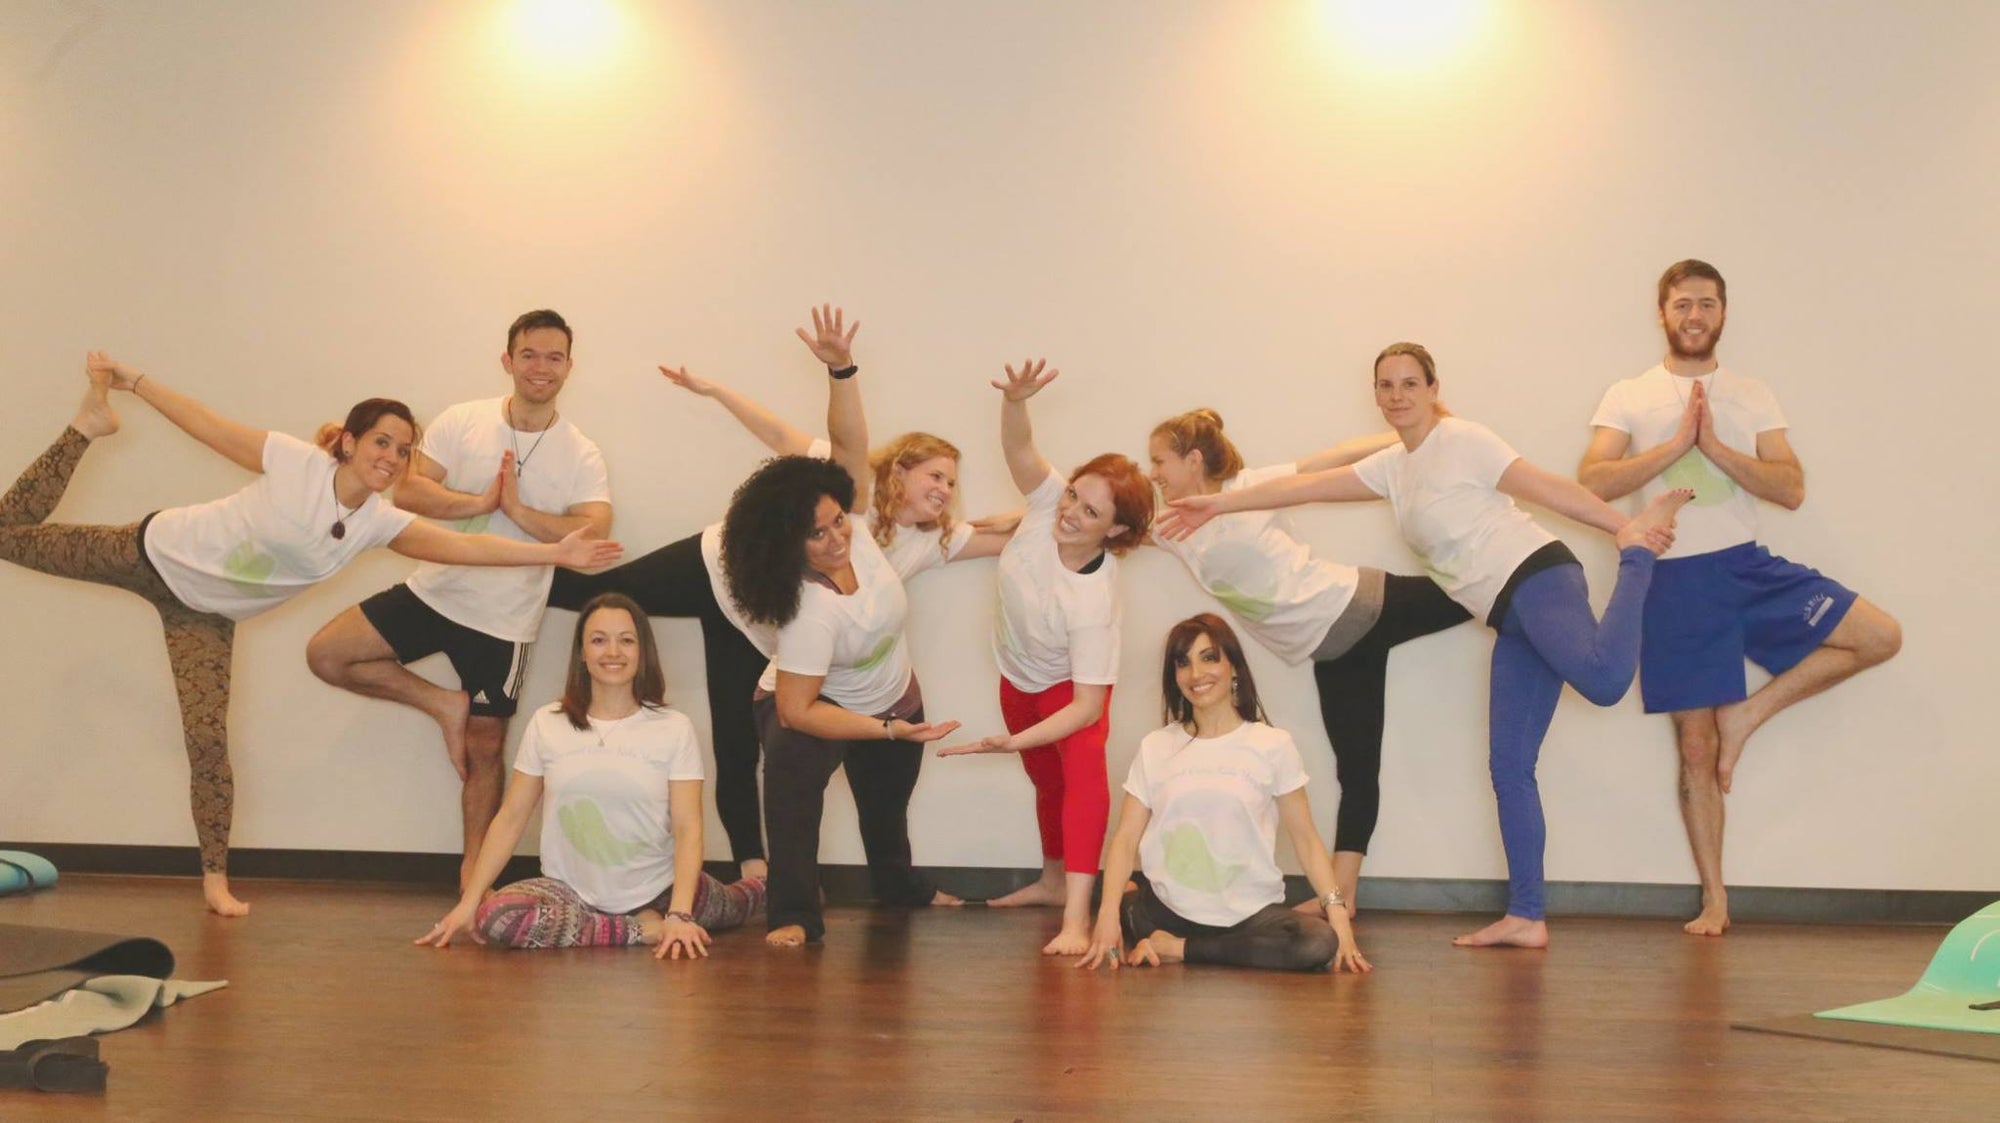 A group of 10 adult learners at a yoga teacher training doing poses and smiling